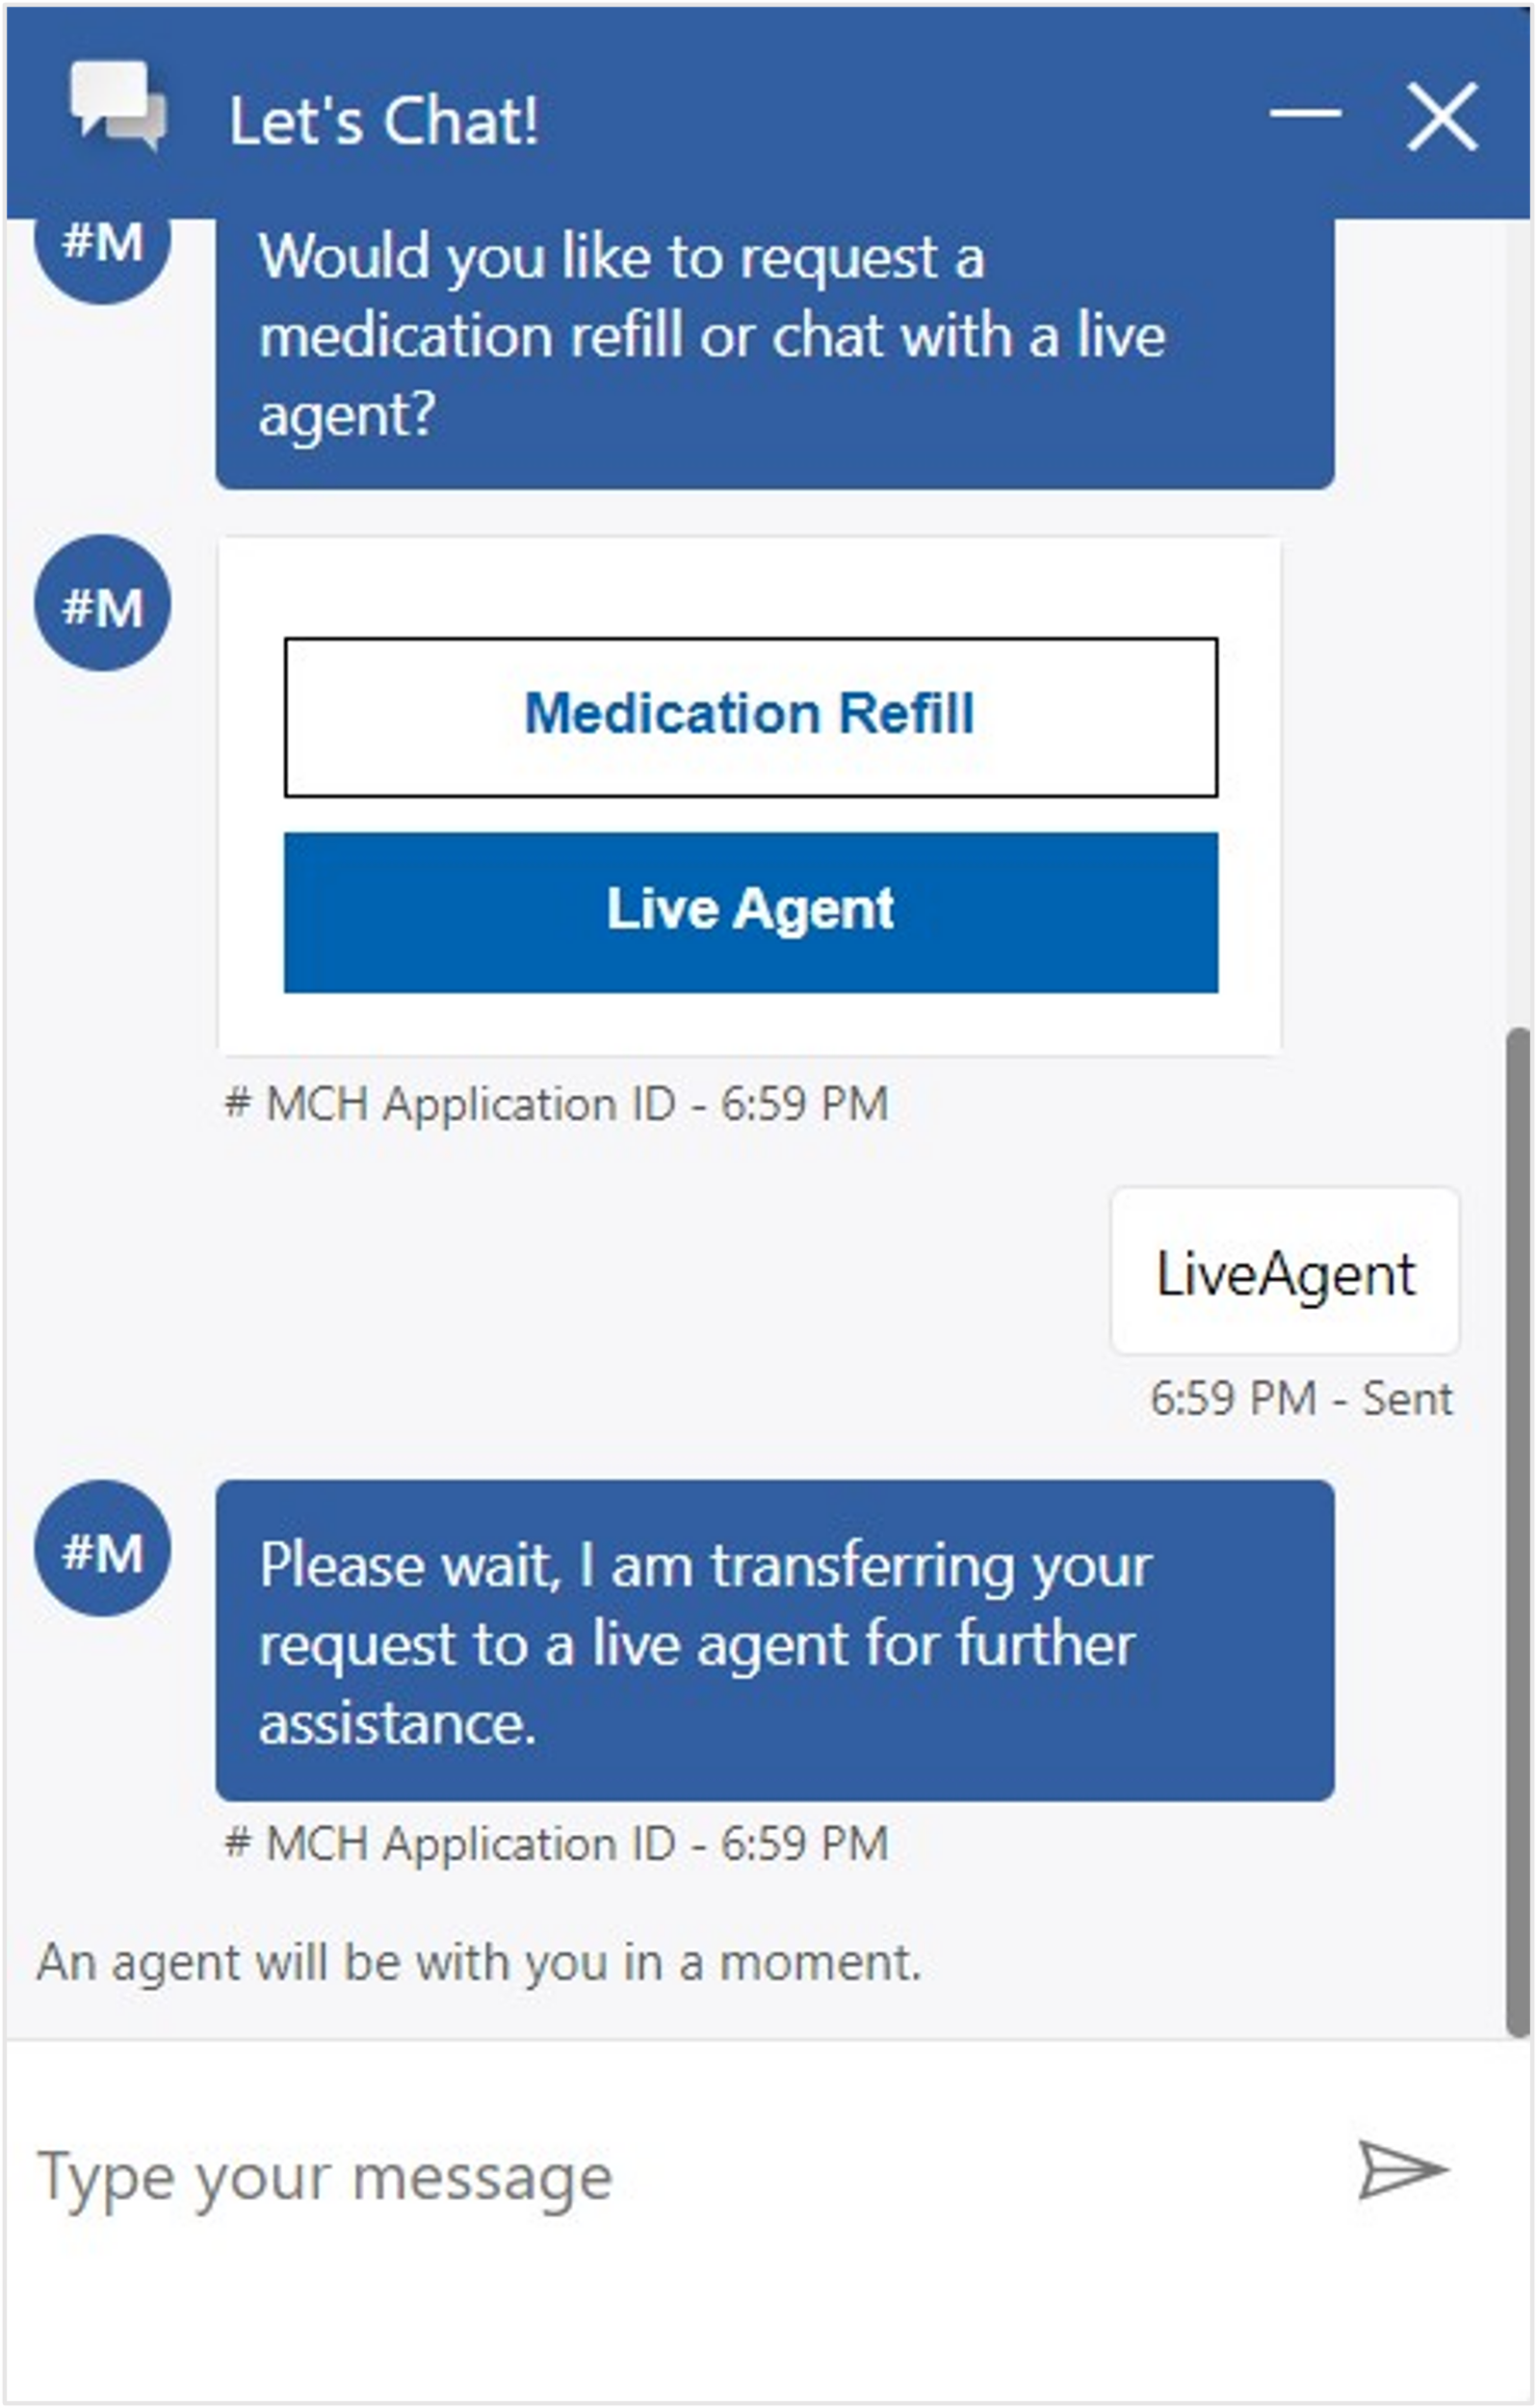 Screenshot of the Let's Chat dialogue window with Medication Refill and Live Agent options.